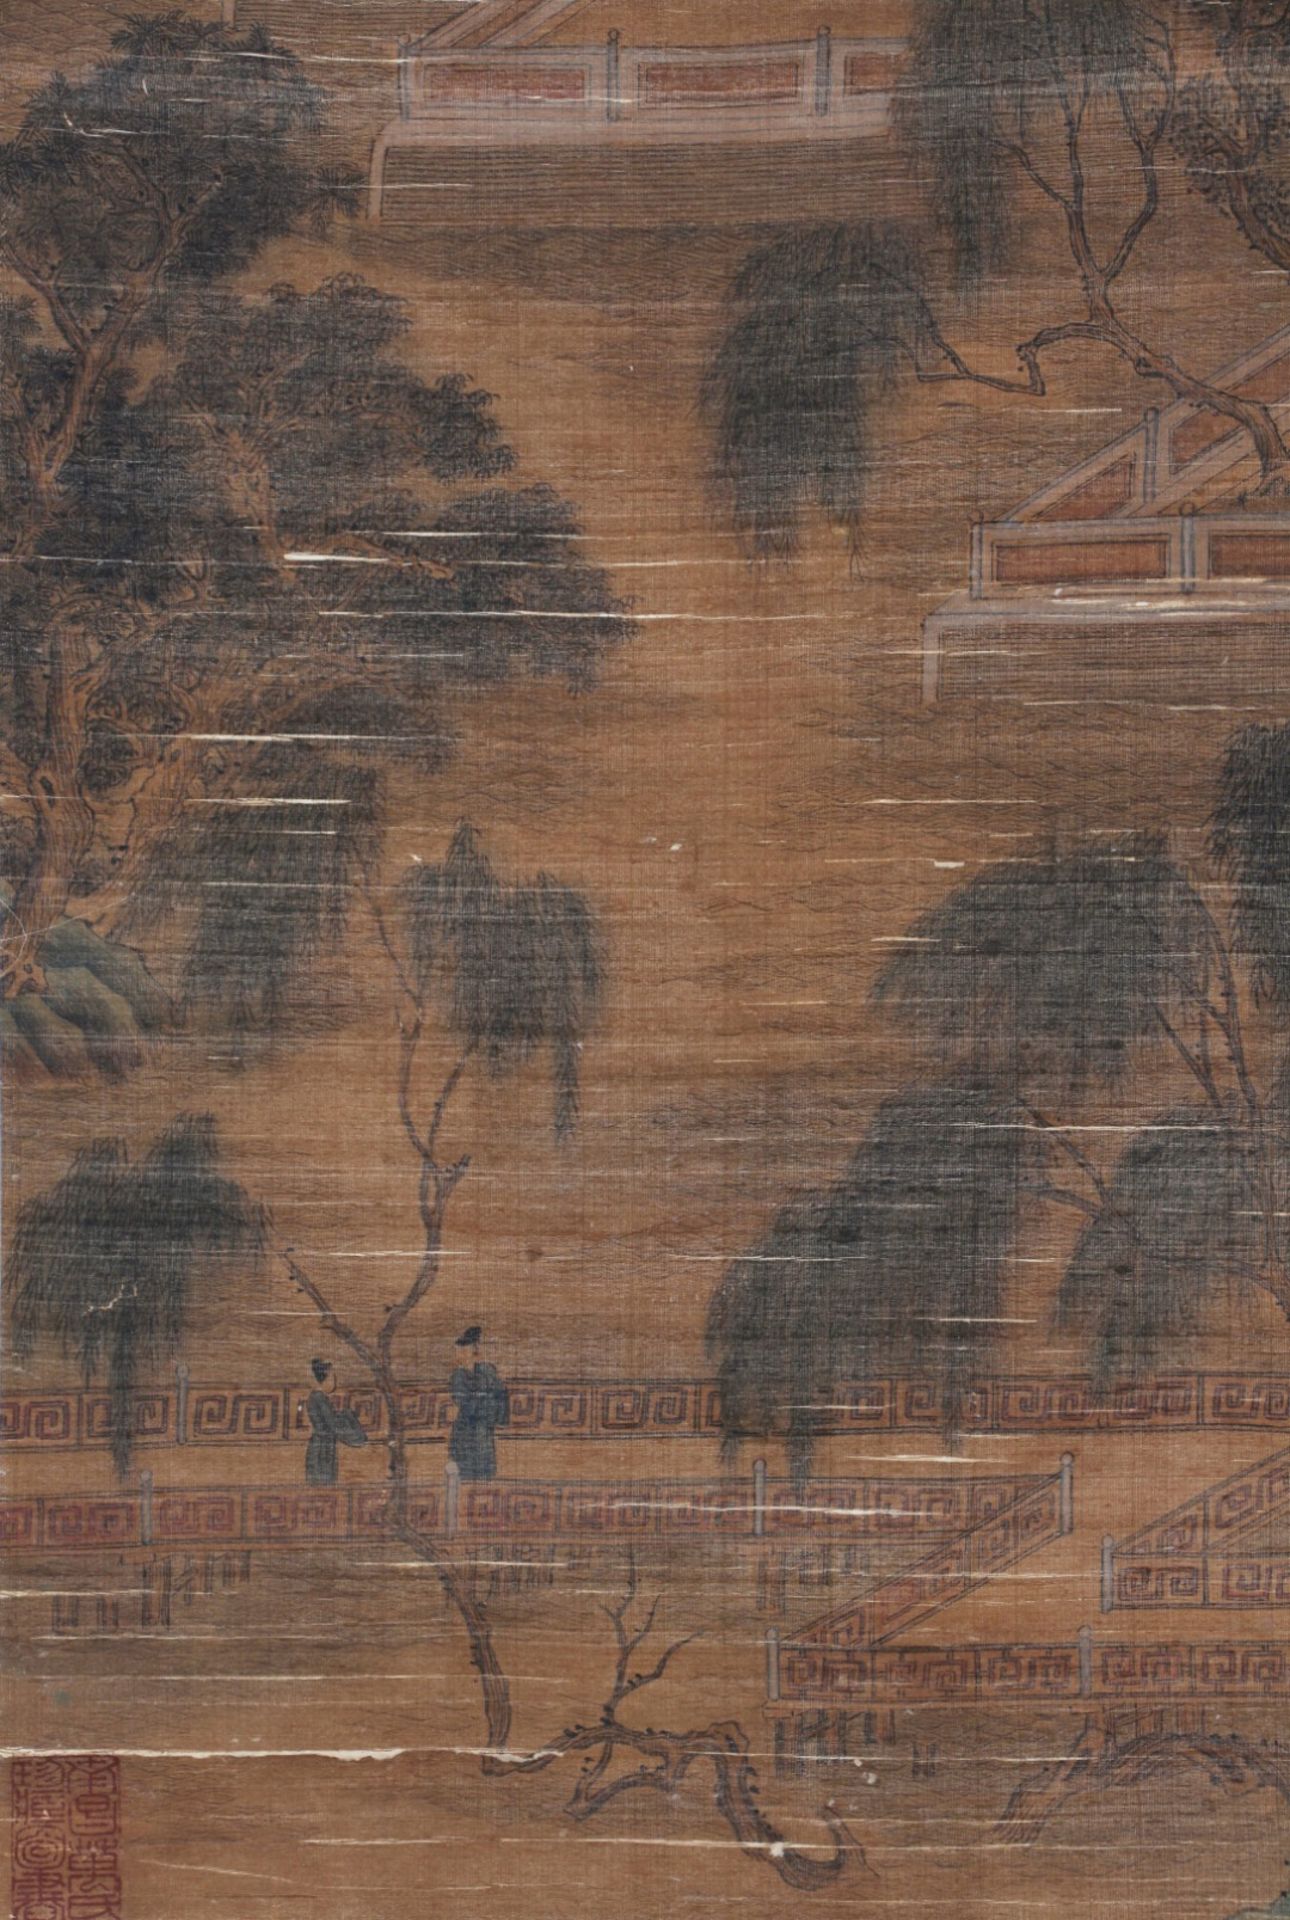 A Chinese Scroll Painting By Li Cheng - Image 6 of 13